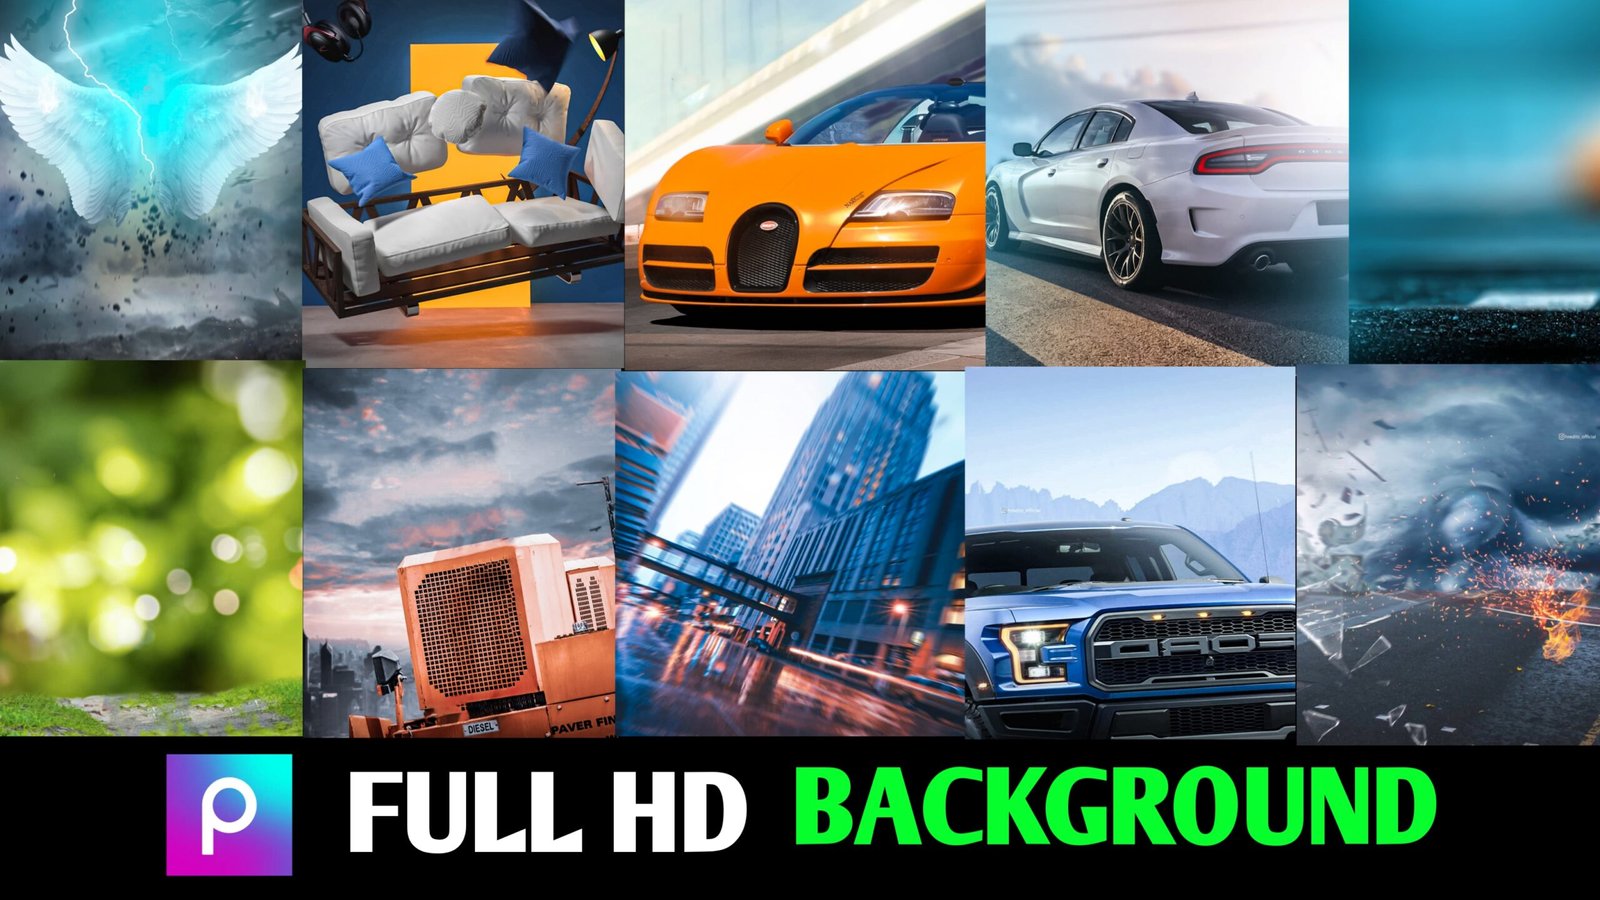 Download HD Backgrounds for editing your photos  2020